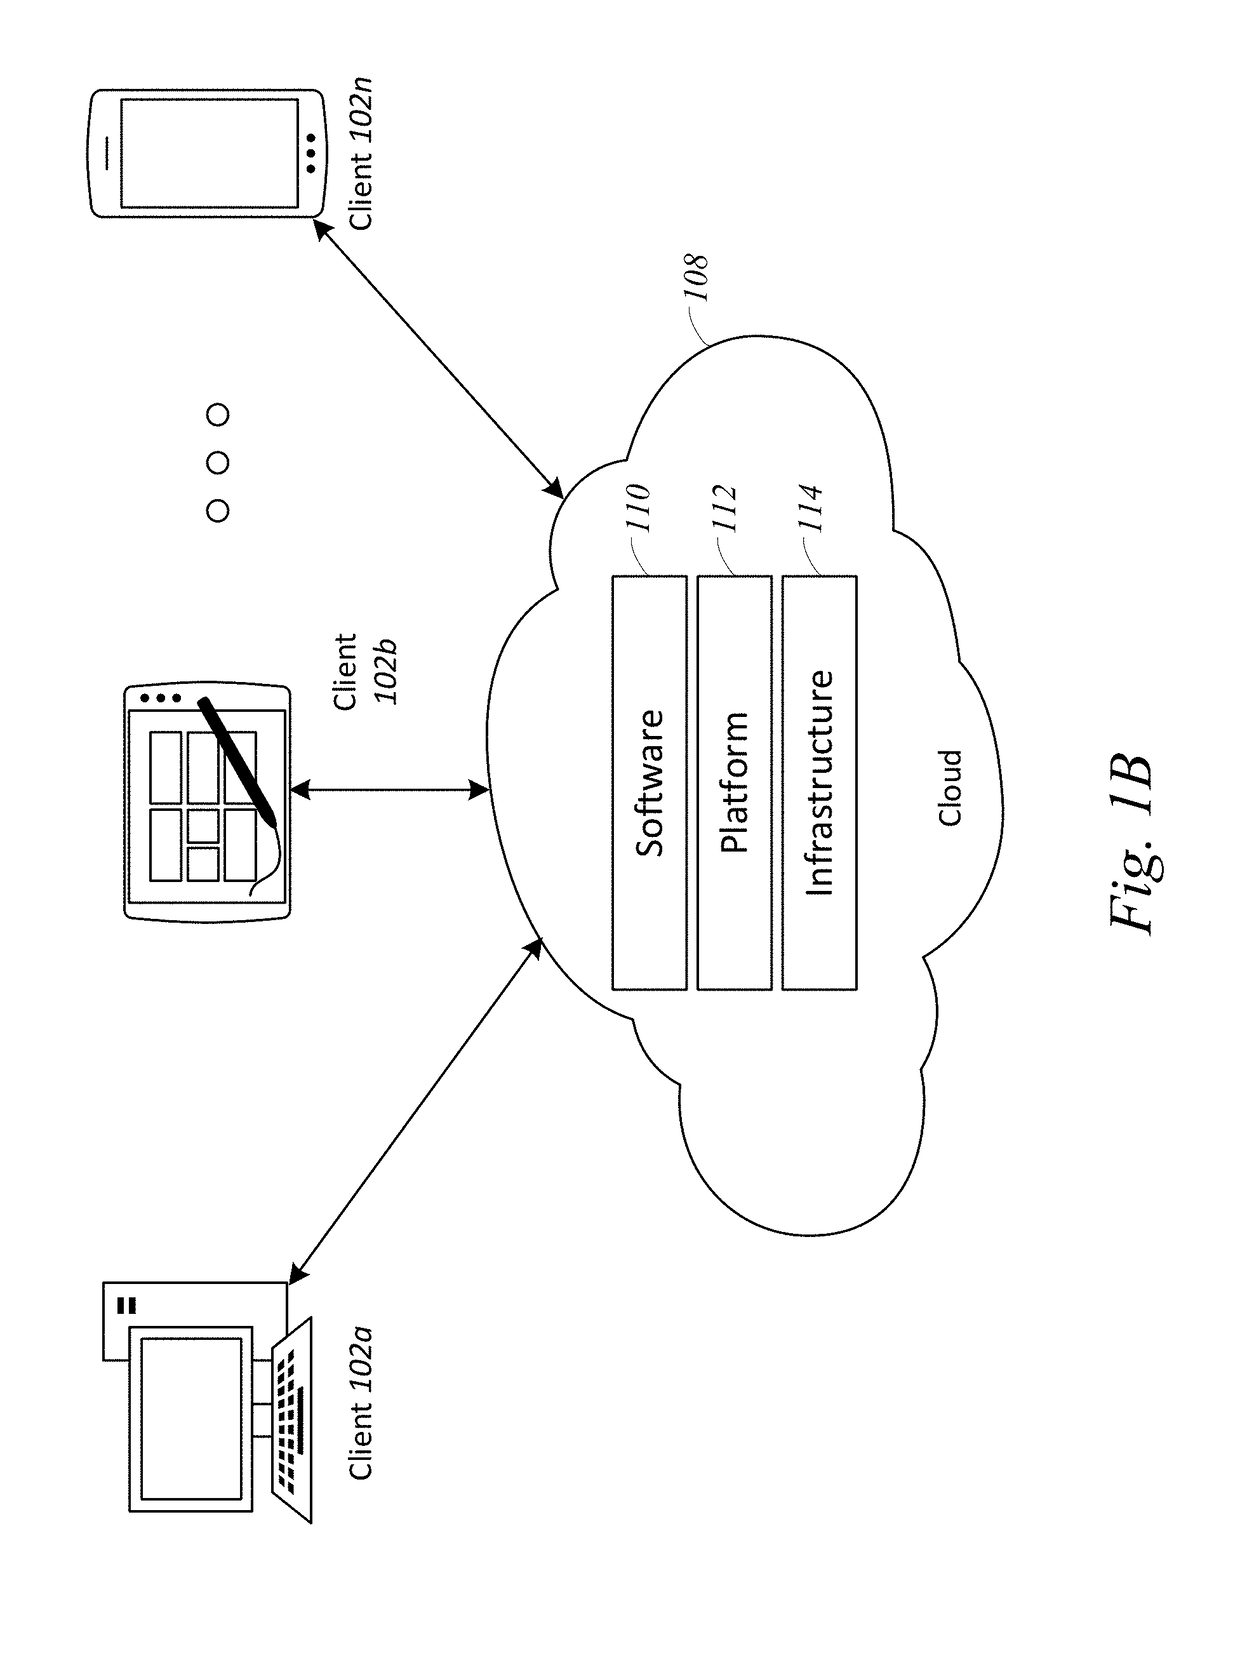 Systems and methods for an artificial intelligence driven smart template